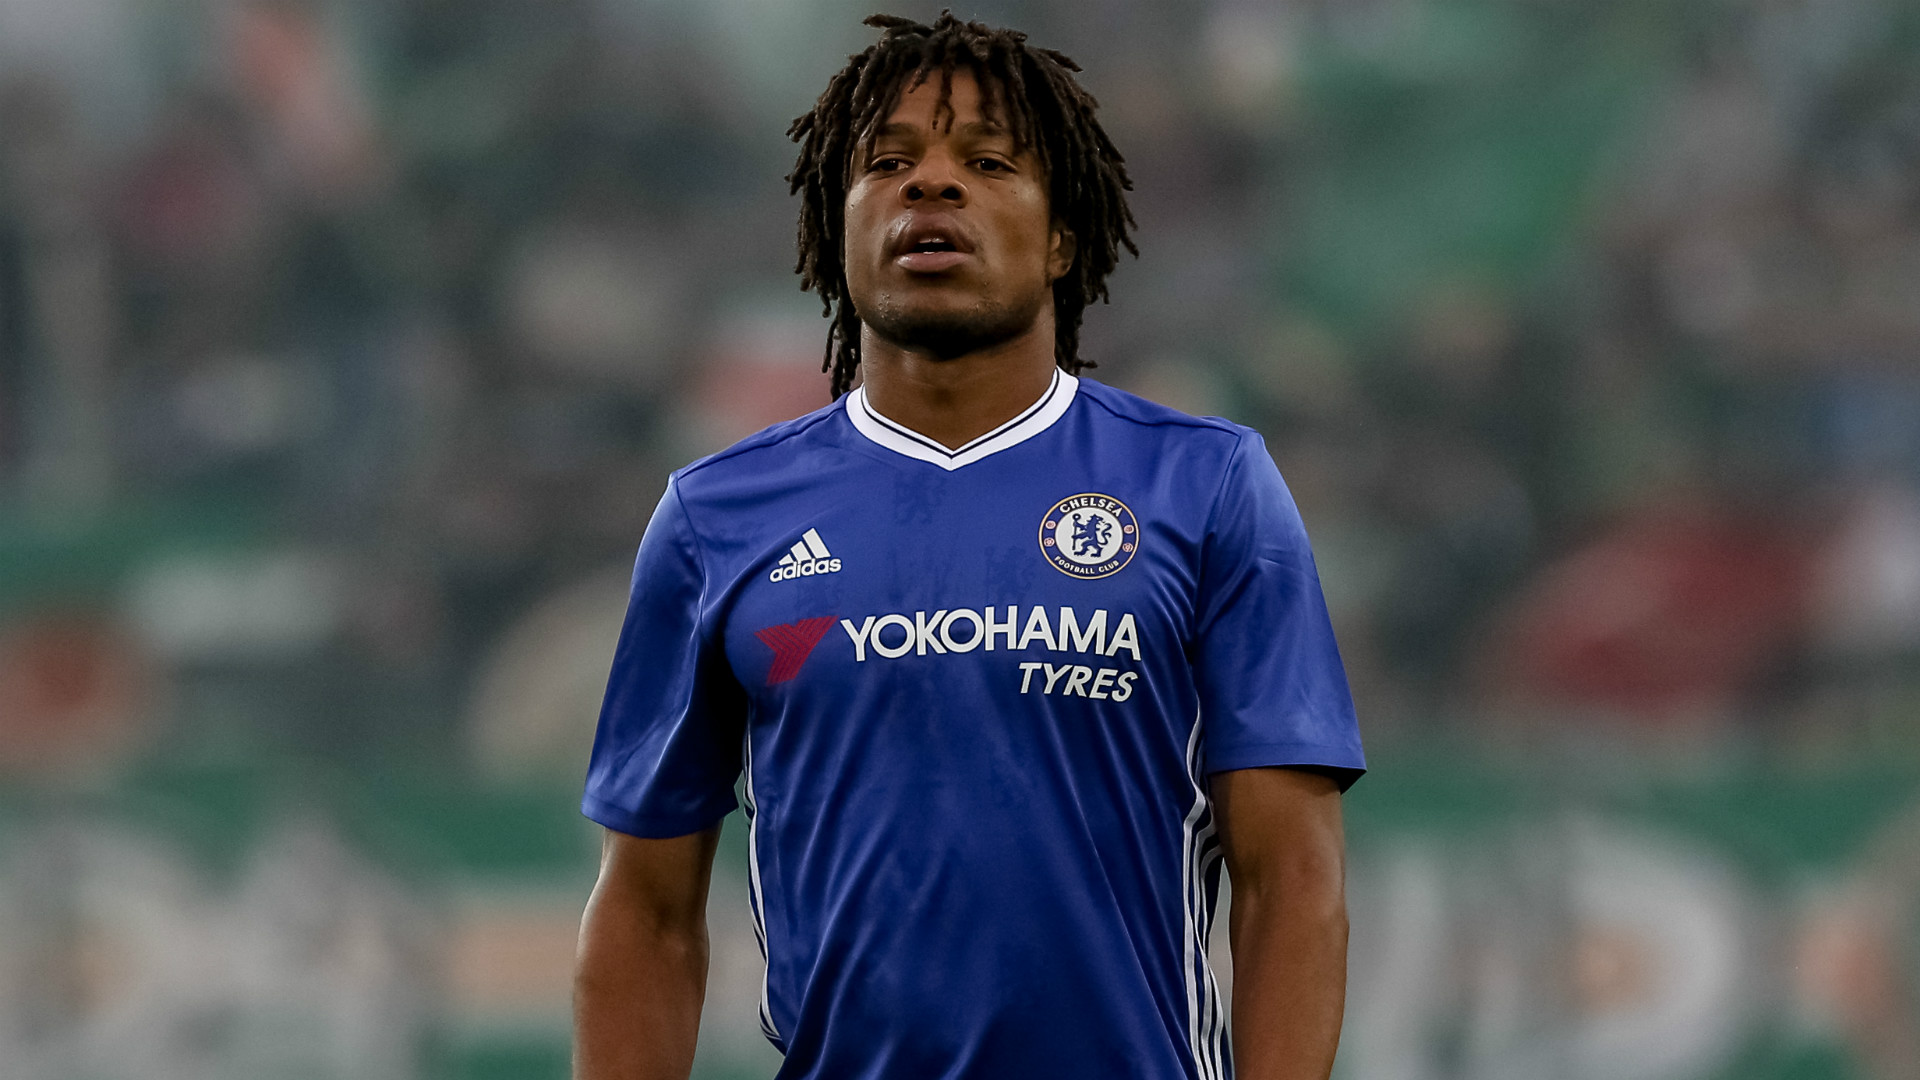 CHELSEA TO SELL REMY FOR CUT-PRICE FEE Loic-remy-chelsea_144z1in5iaysm11c6fni9usca4